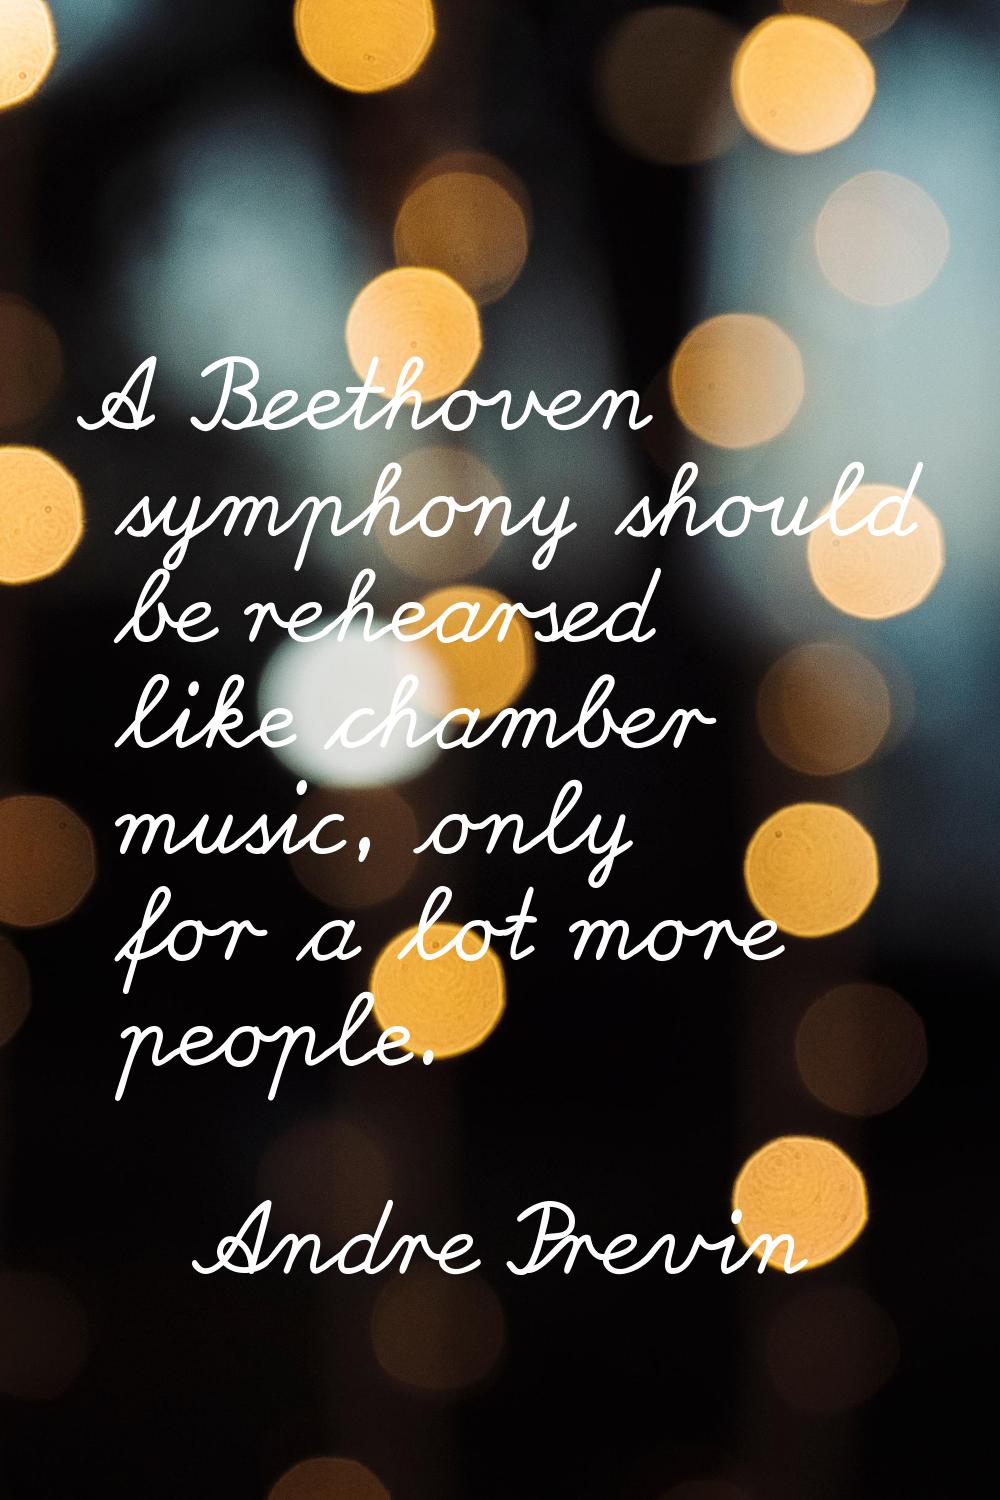 A Beethoven symphony should be rehearsed like chamber music, only for a lot more people.